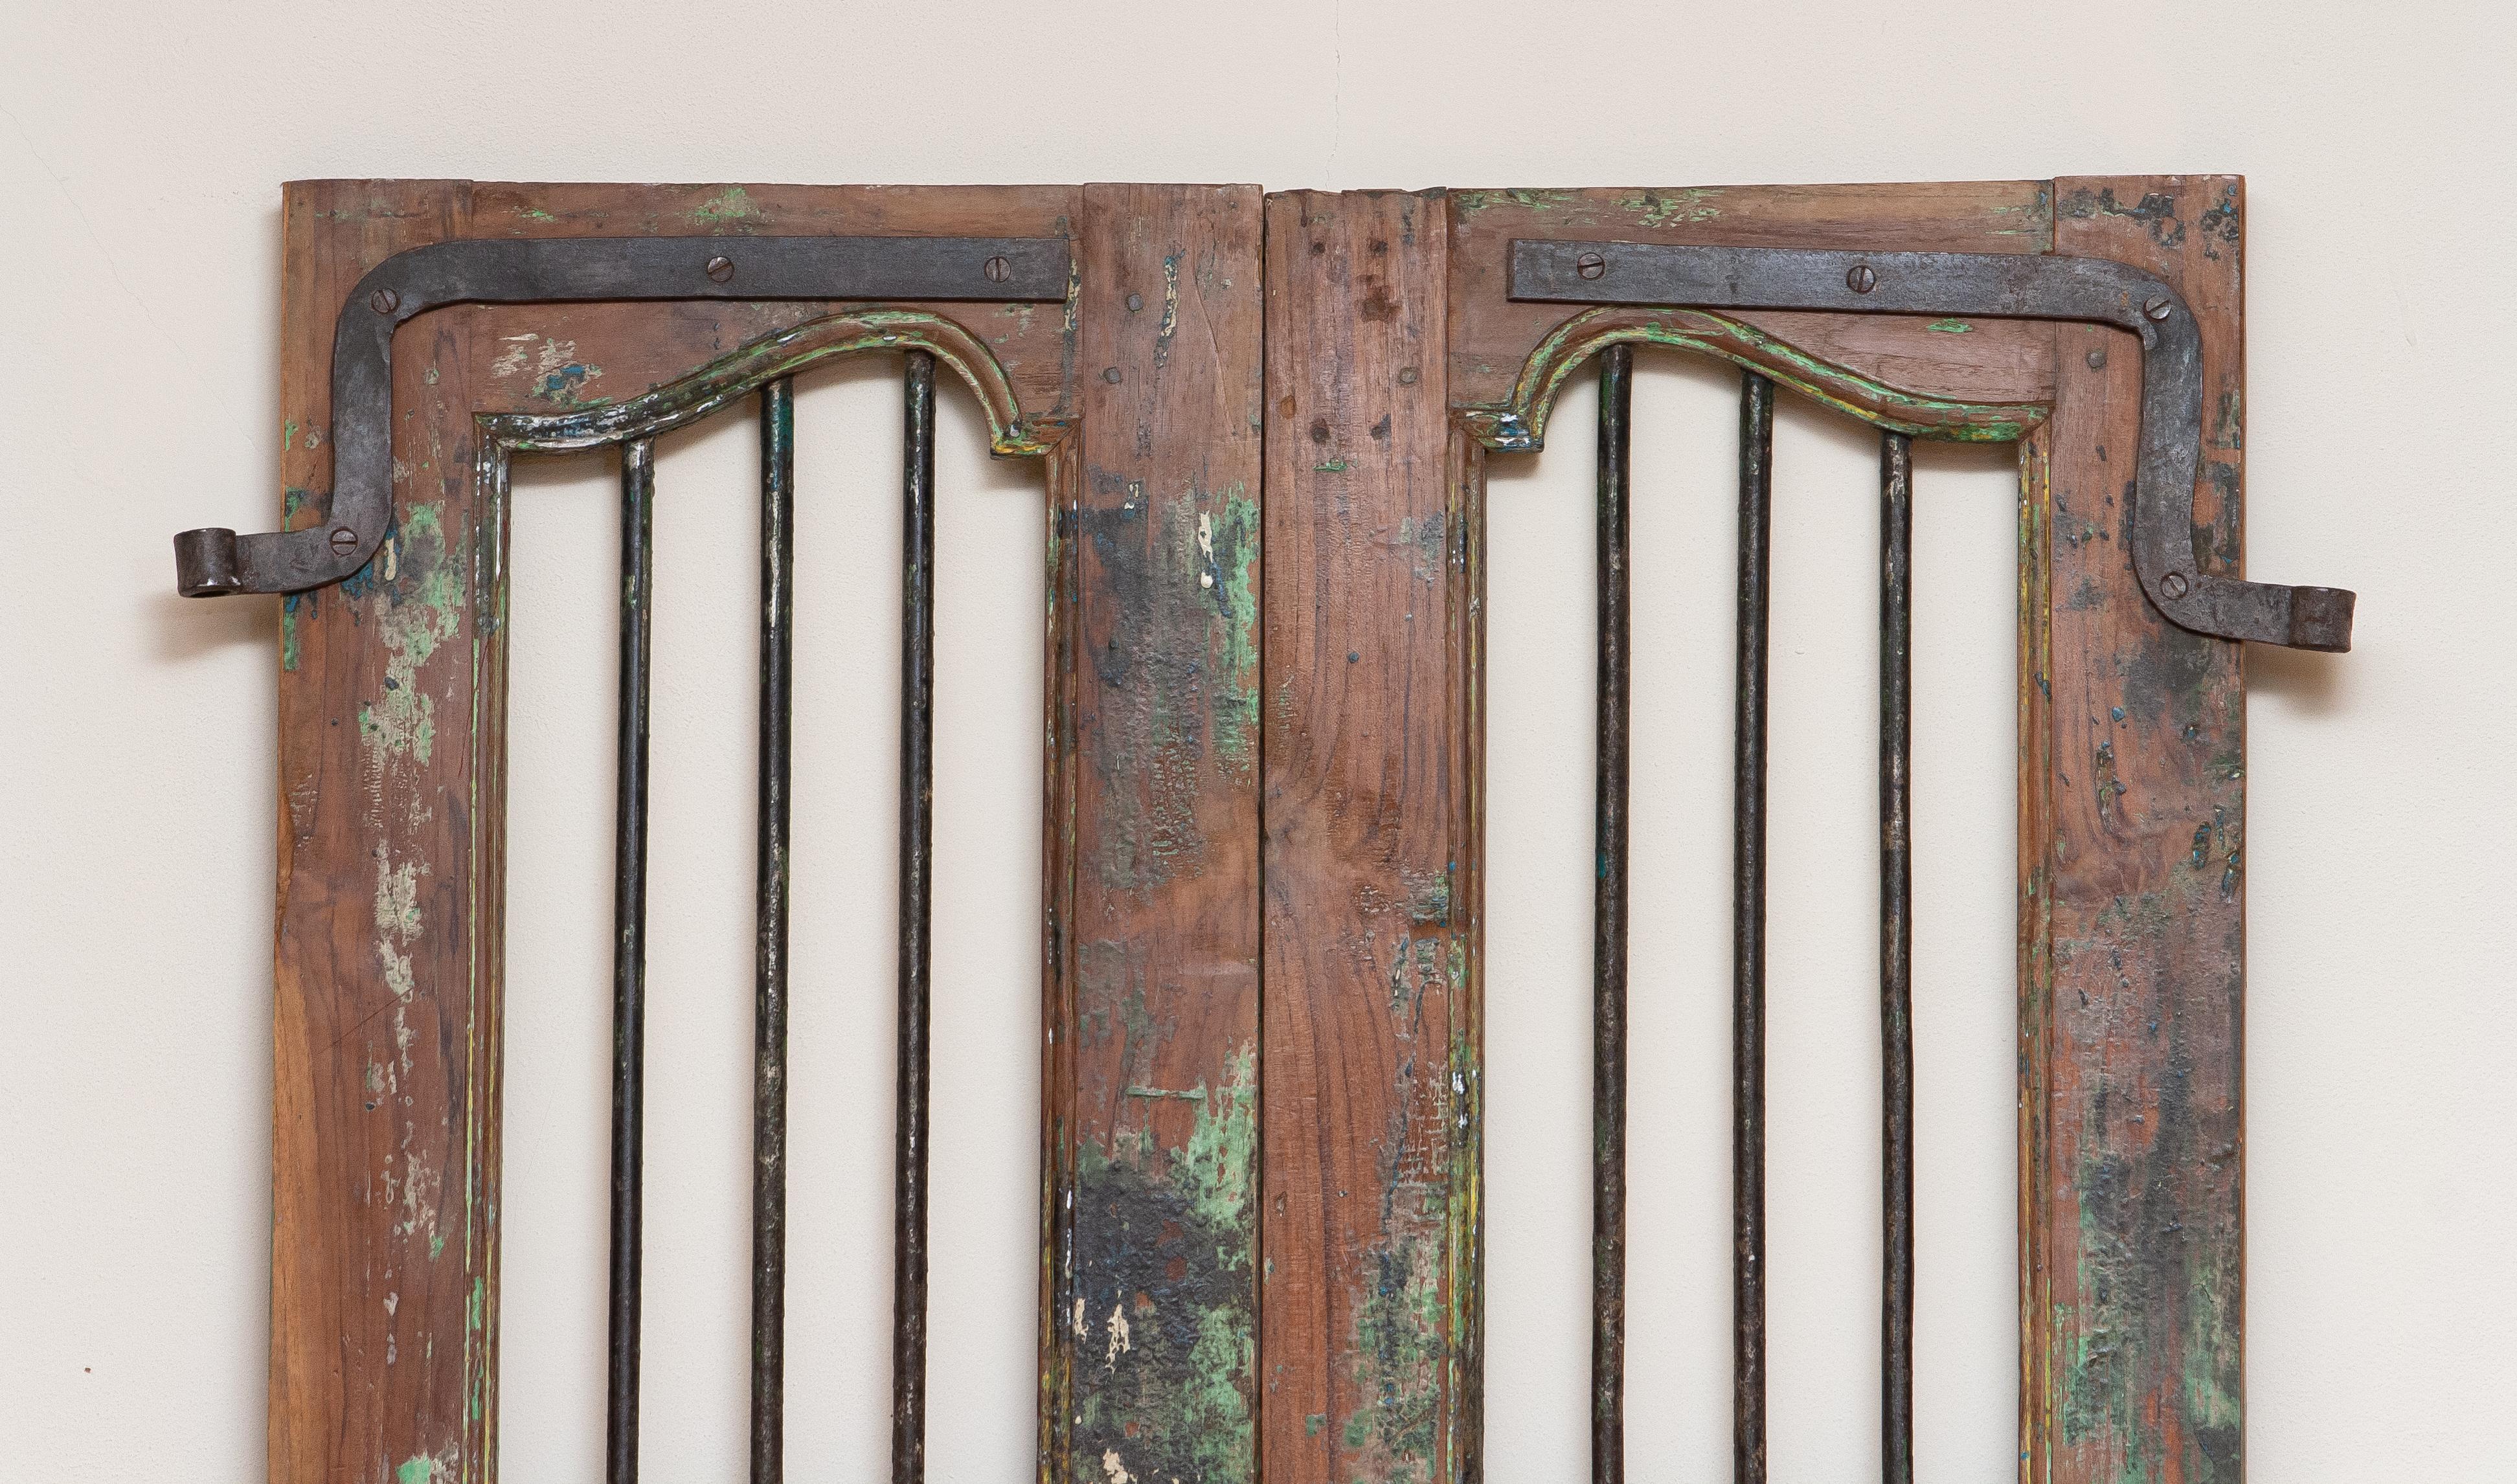 Steel 19th Century Pair of Antique Window / Doors Shutters from India with Metal Bars